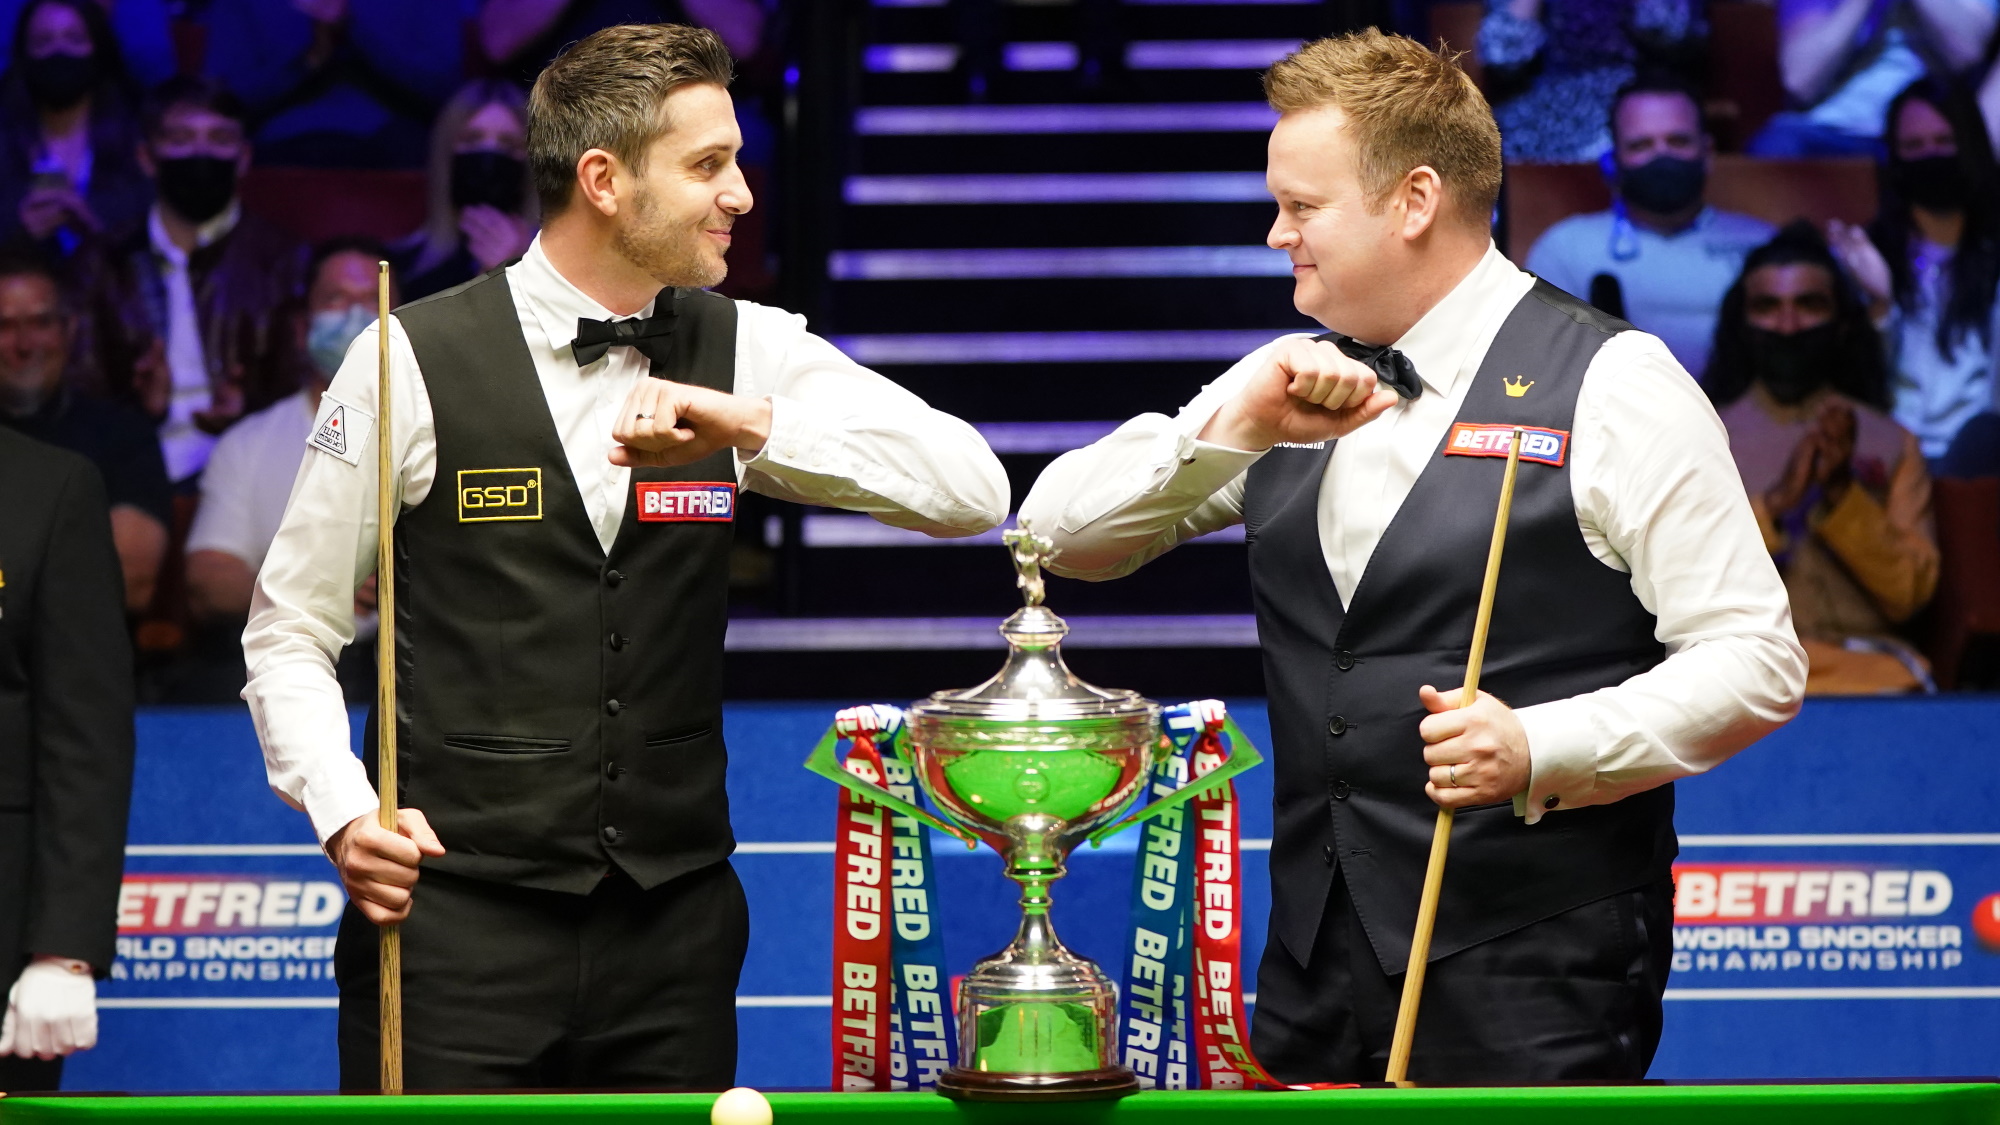 Mark Selby vs Shaun Murphy live stream how to watch World Snooker Championship final from anywhere TechRadar